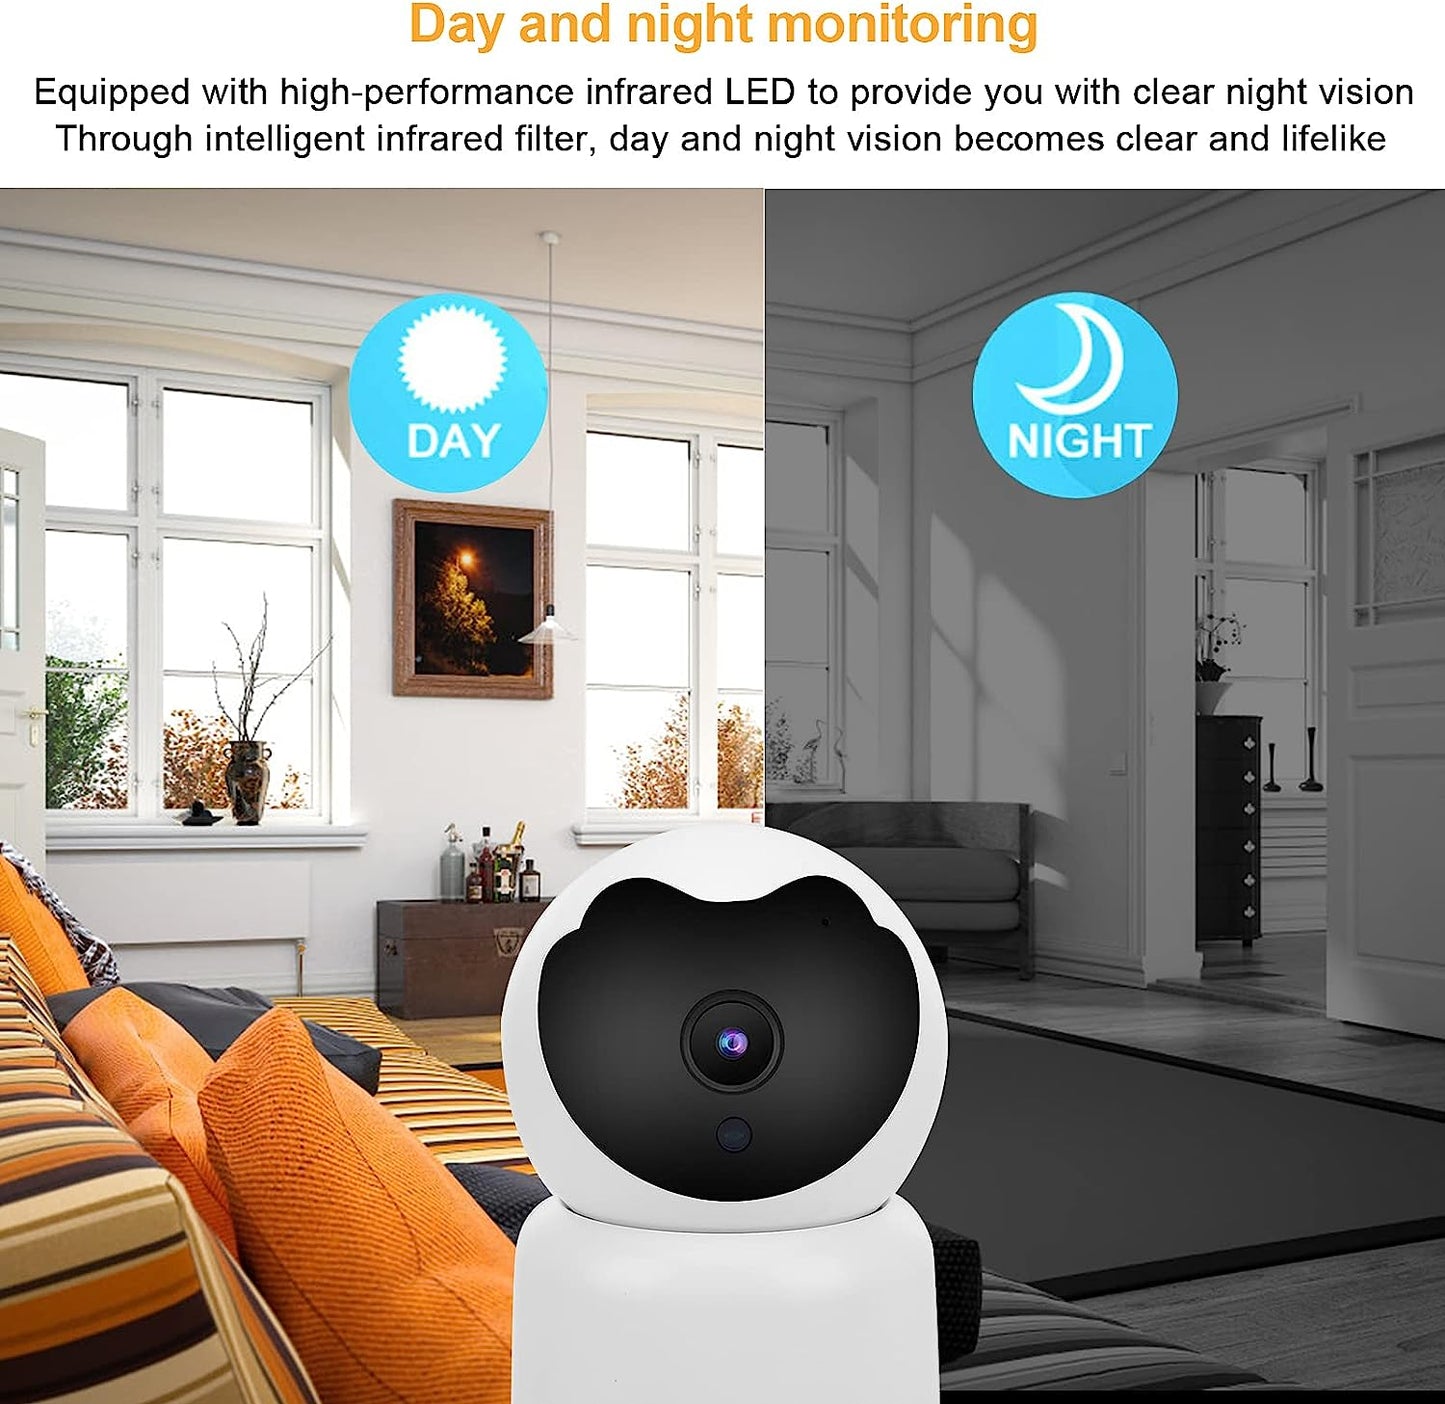 Wifi Baby Monitor with Built-in Microphone and Speaker for Pet or Baby - Buy Wifi Baby Monitor with Built-in Microphone and Speaker for Pet or Baby in Dubai - HOCC Dubai - Baby playground outdoor - Shop baby product - Shop Pet product - shop home decor an